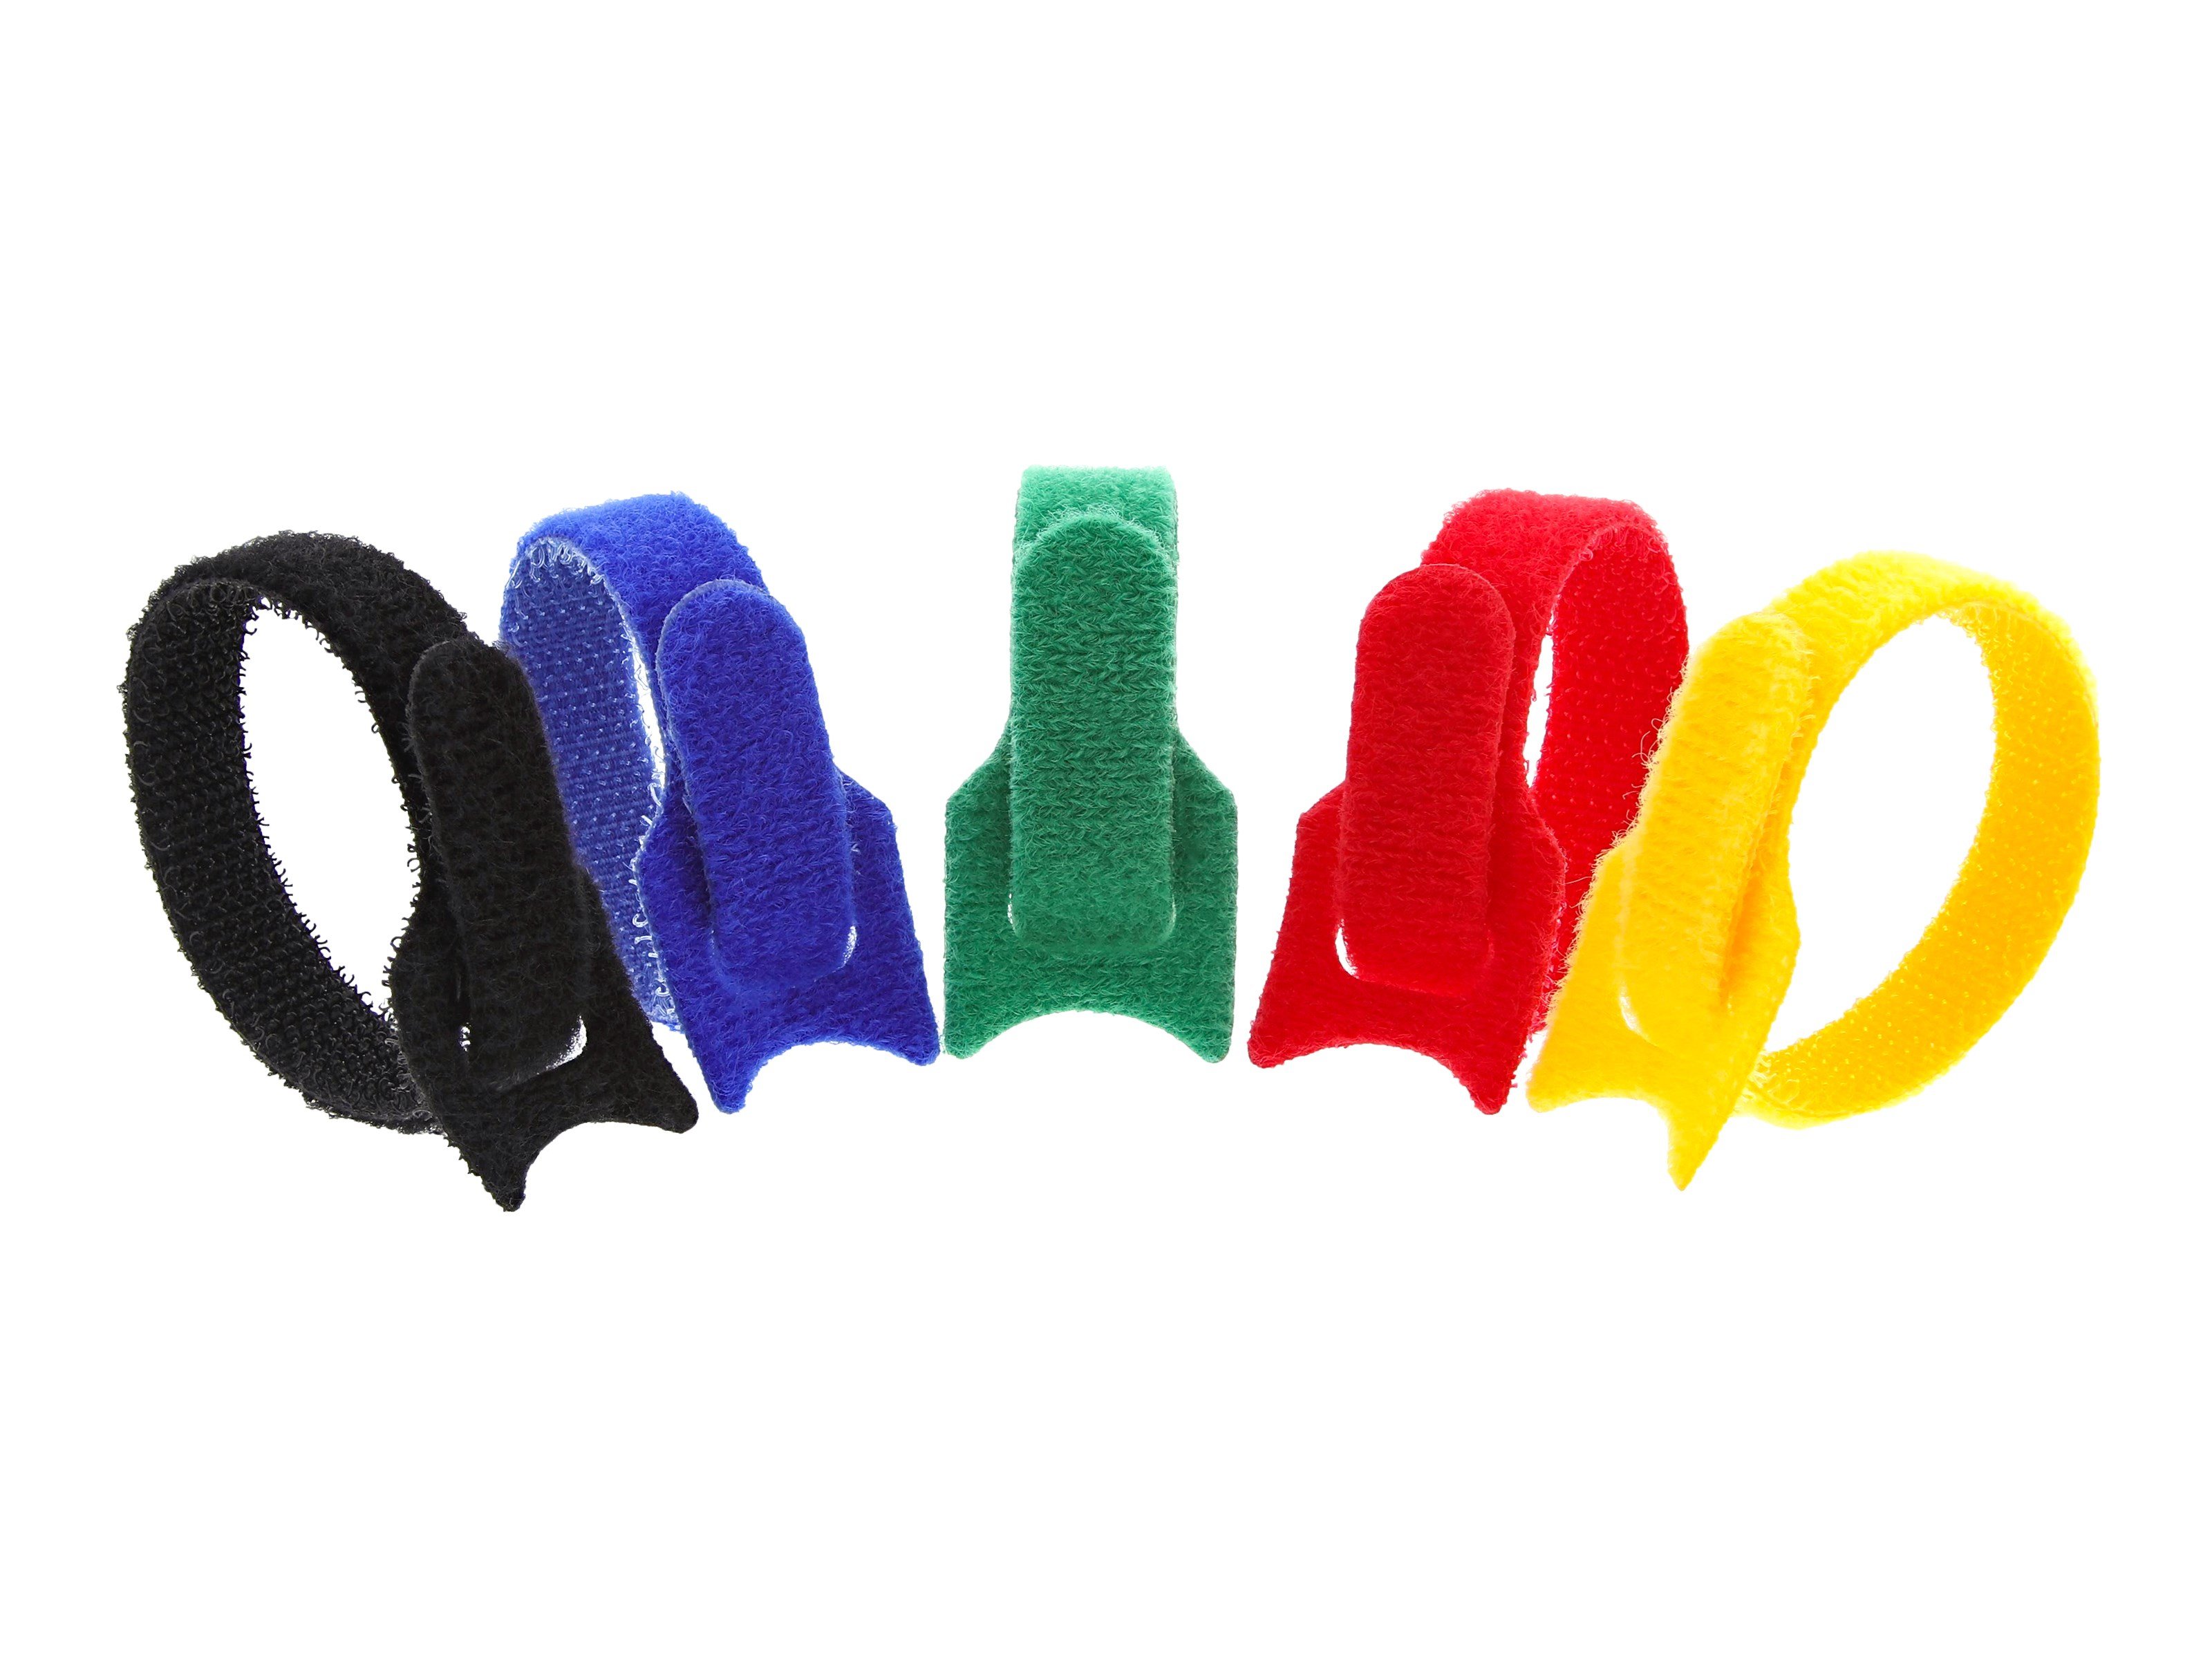 6 Inch Multi-colored Reuseable Tie Wraps - 10 Pack - Secure™ Cable Ties